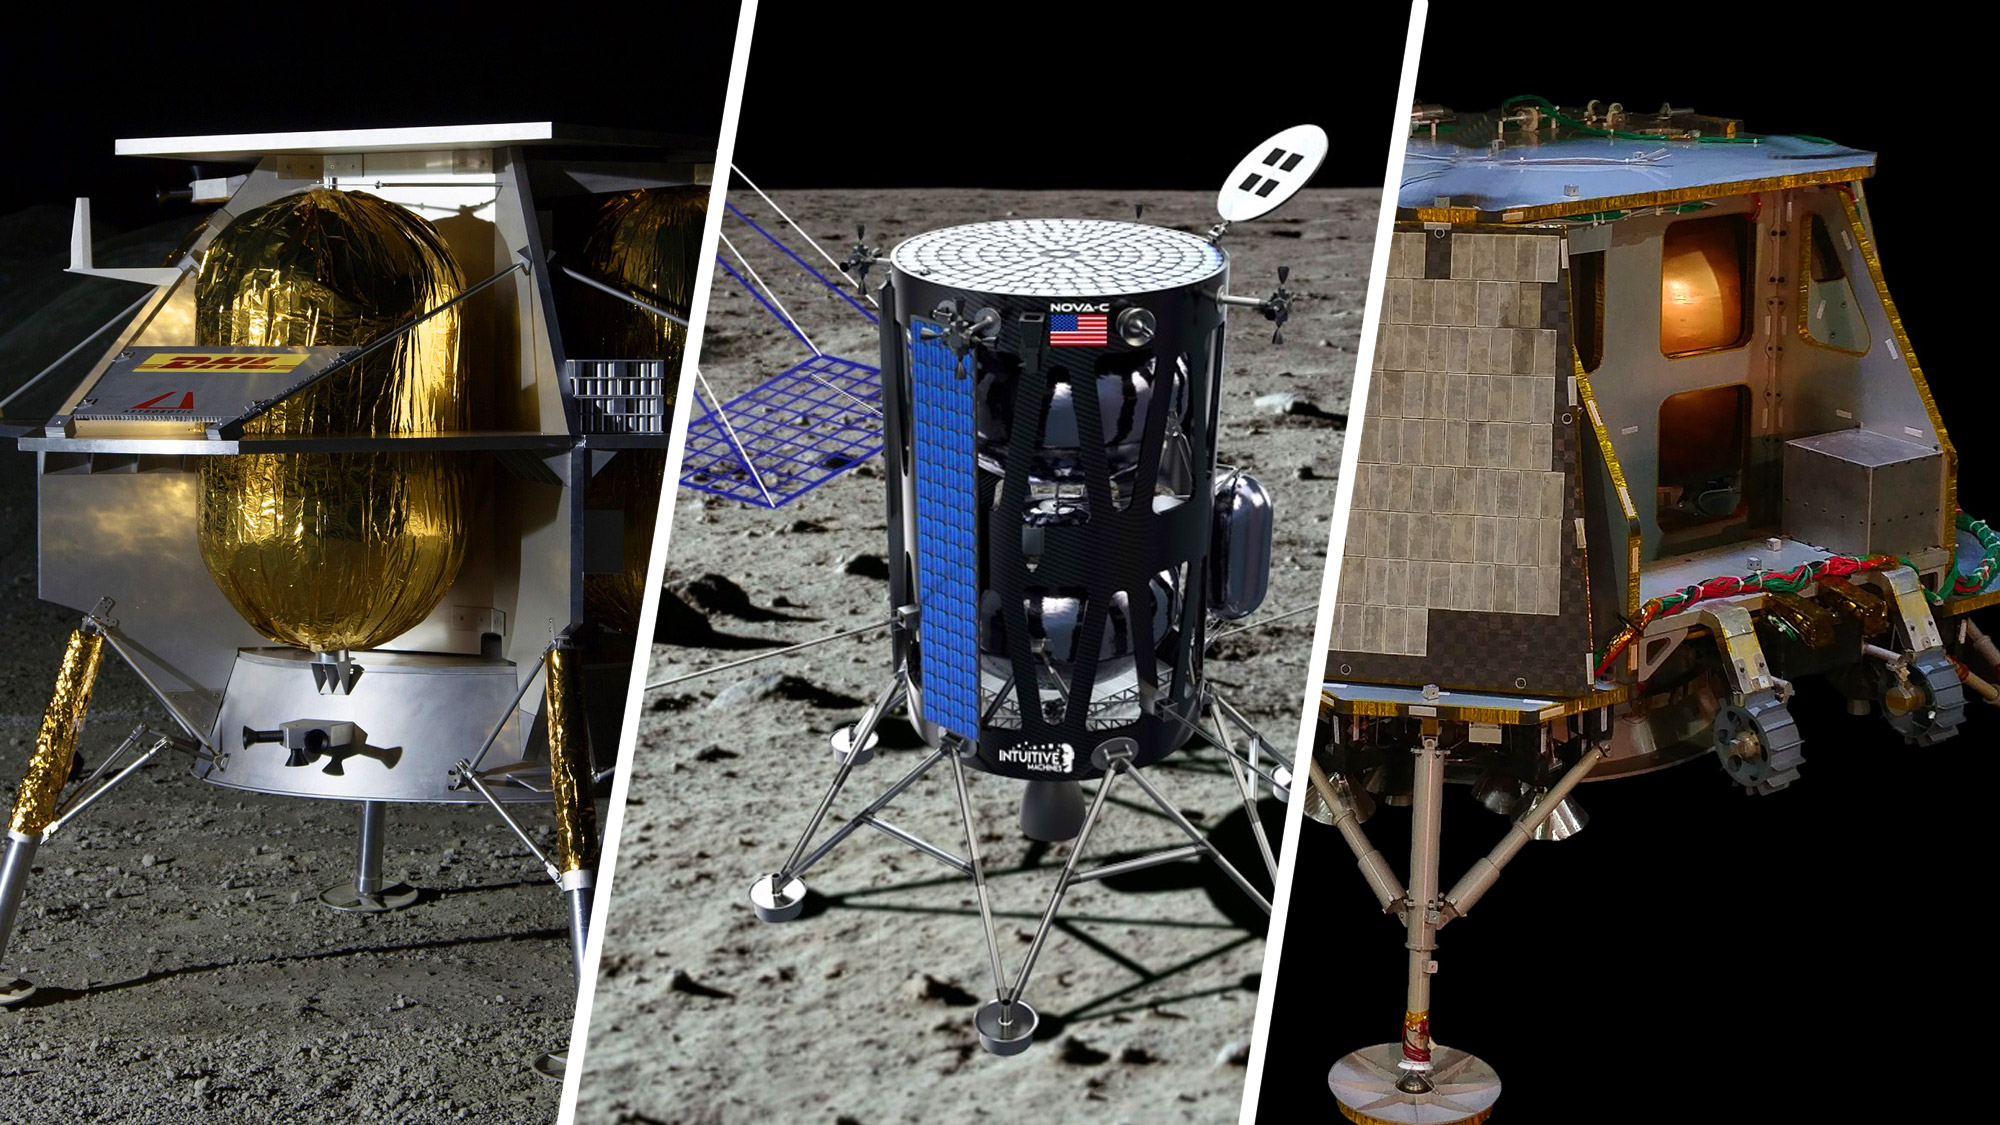 three separate illustrations of small lunar spacecraft, separated from each other by white lines. each spacecraft is depicted on the moon's surface or in black space